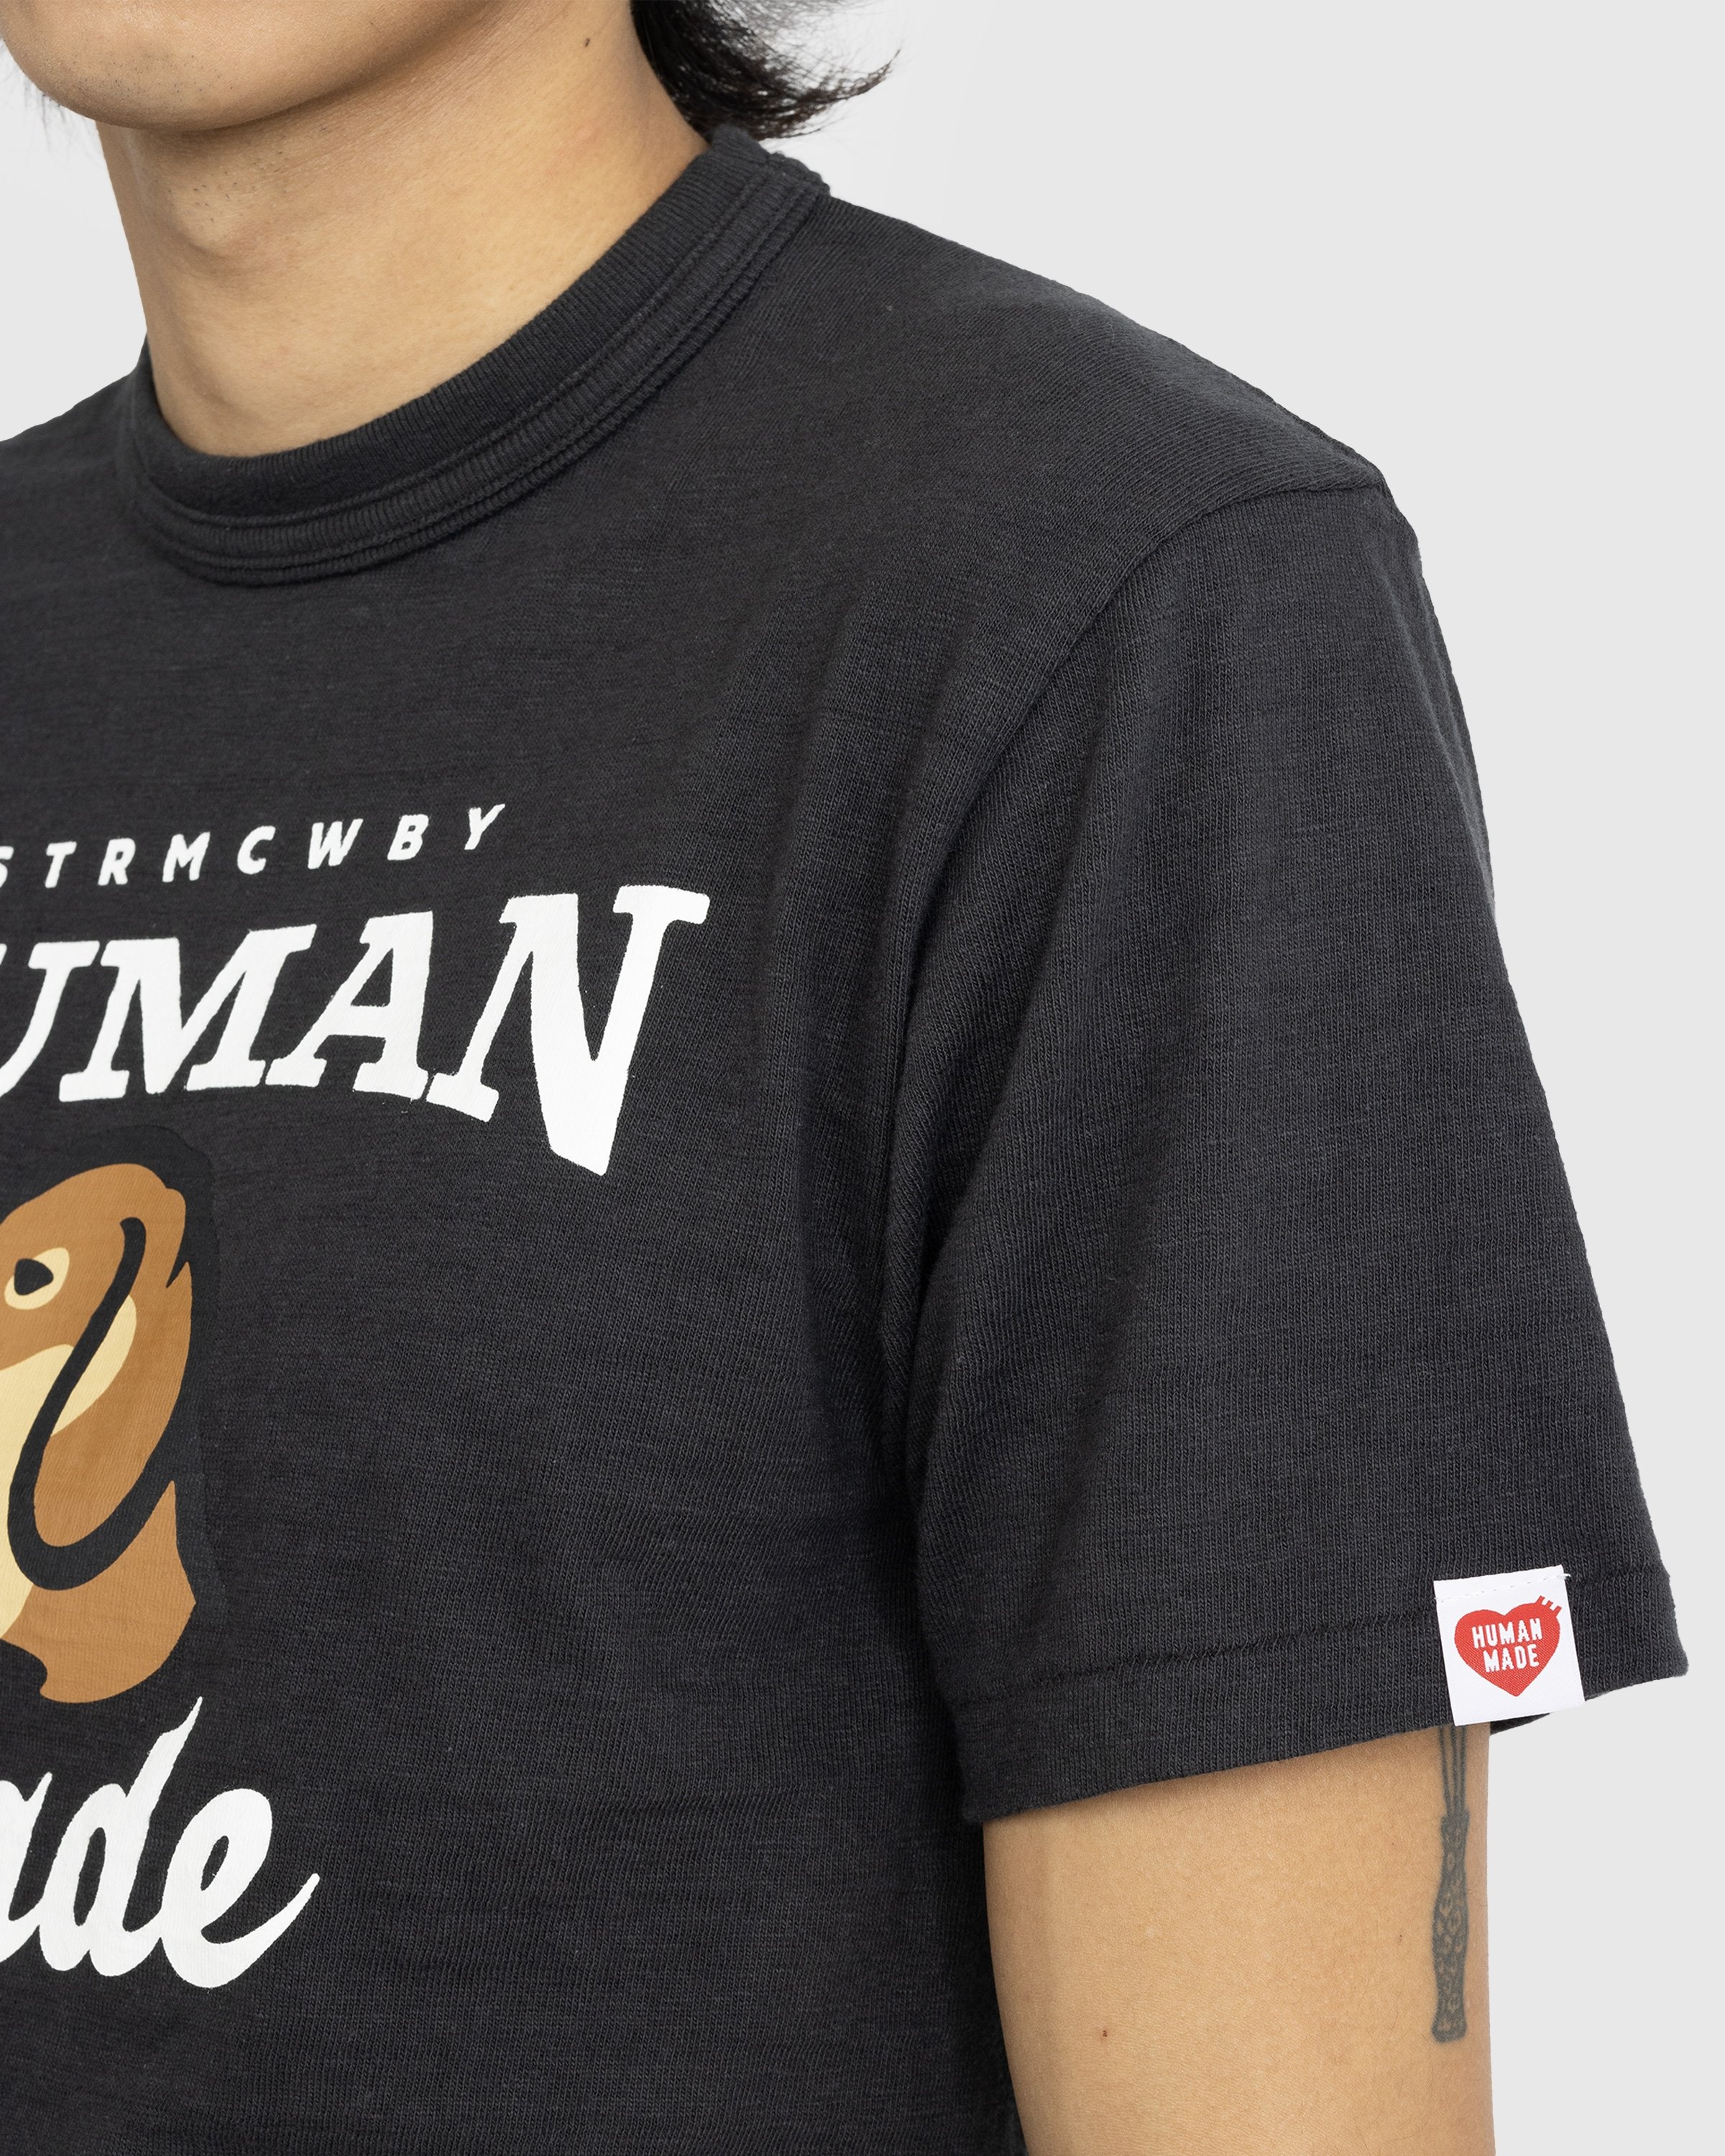 human made Tシャツ